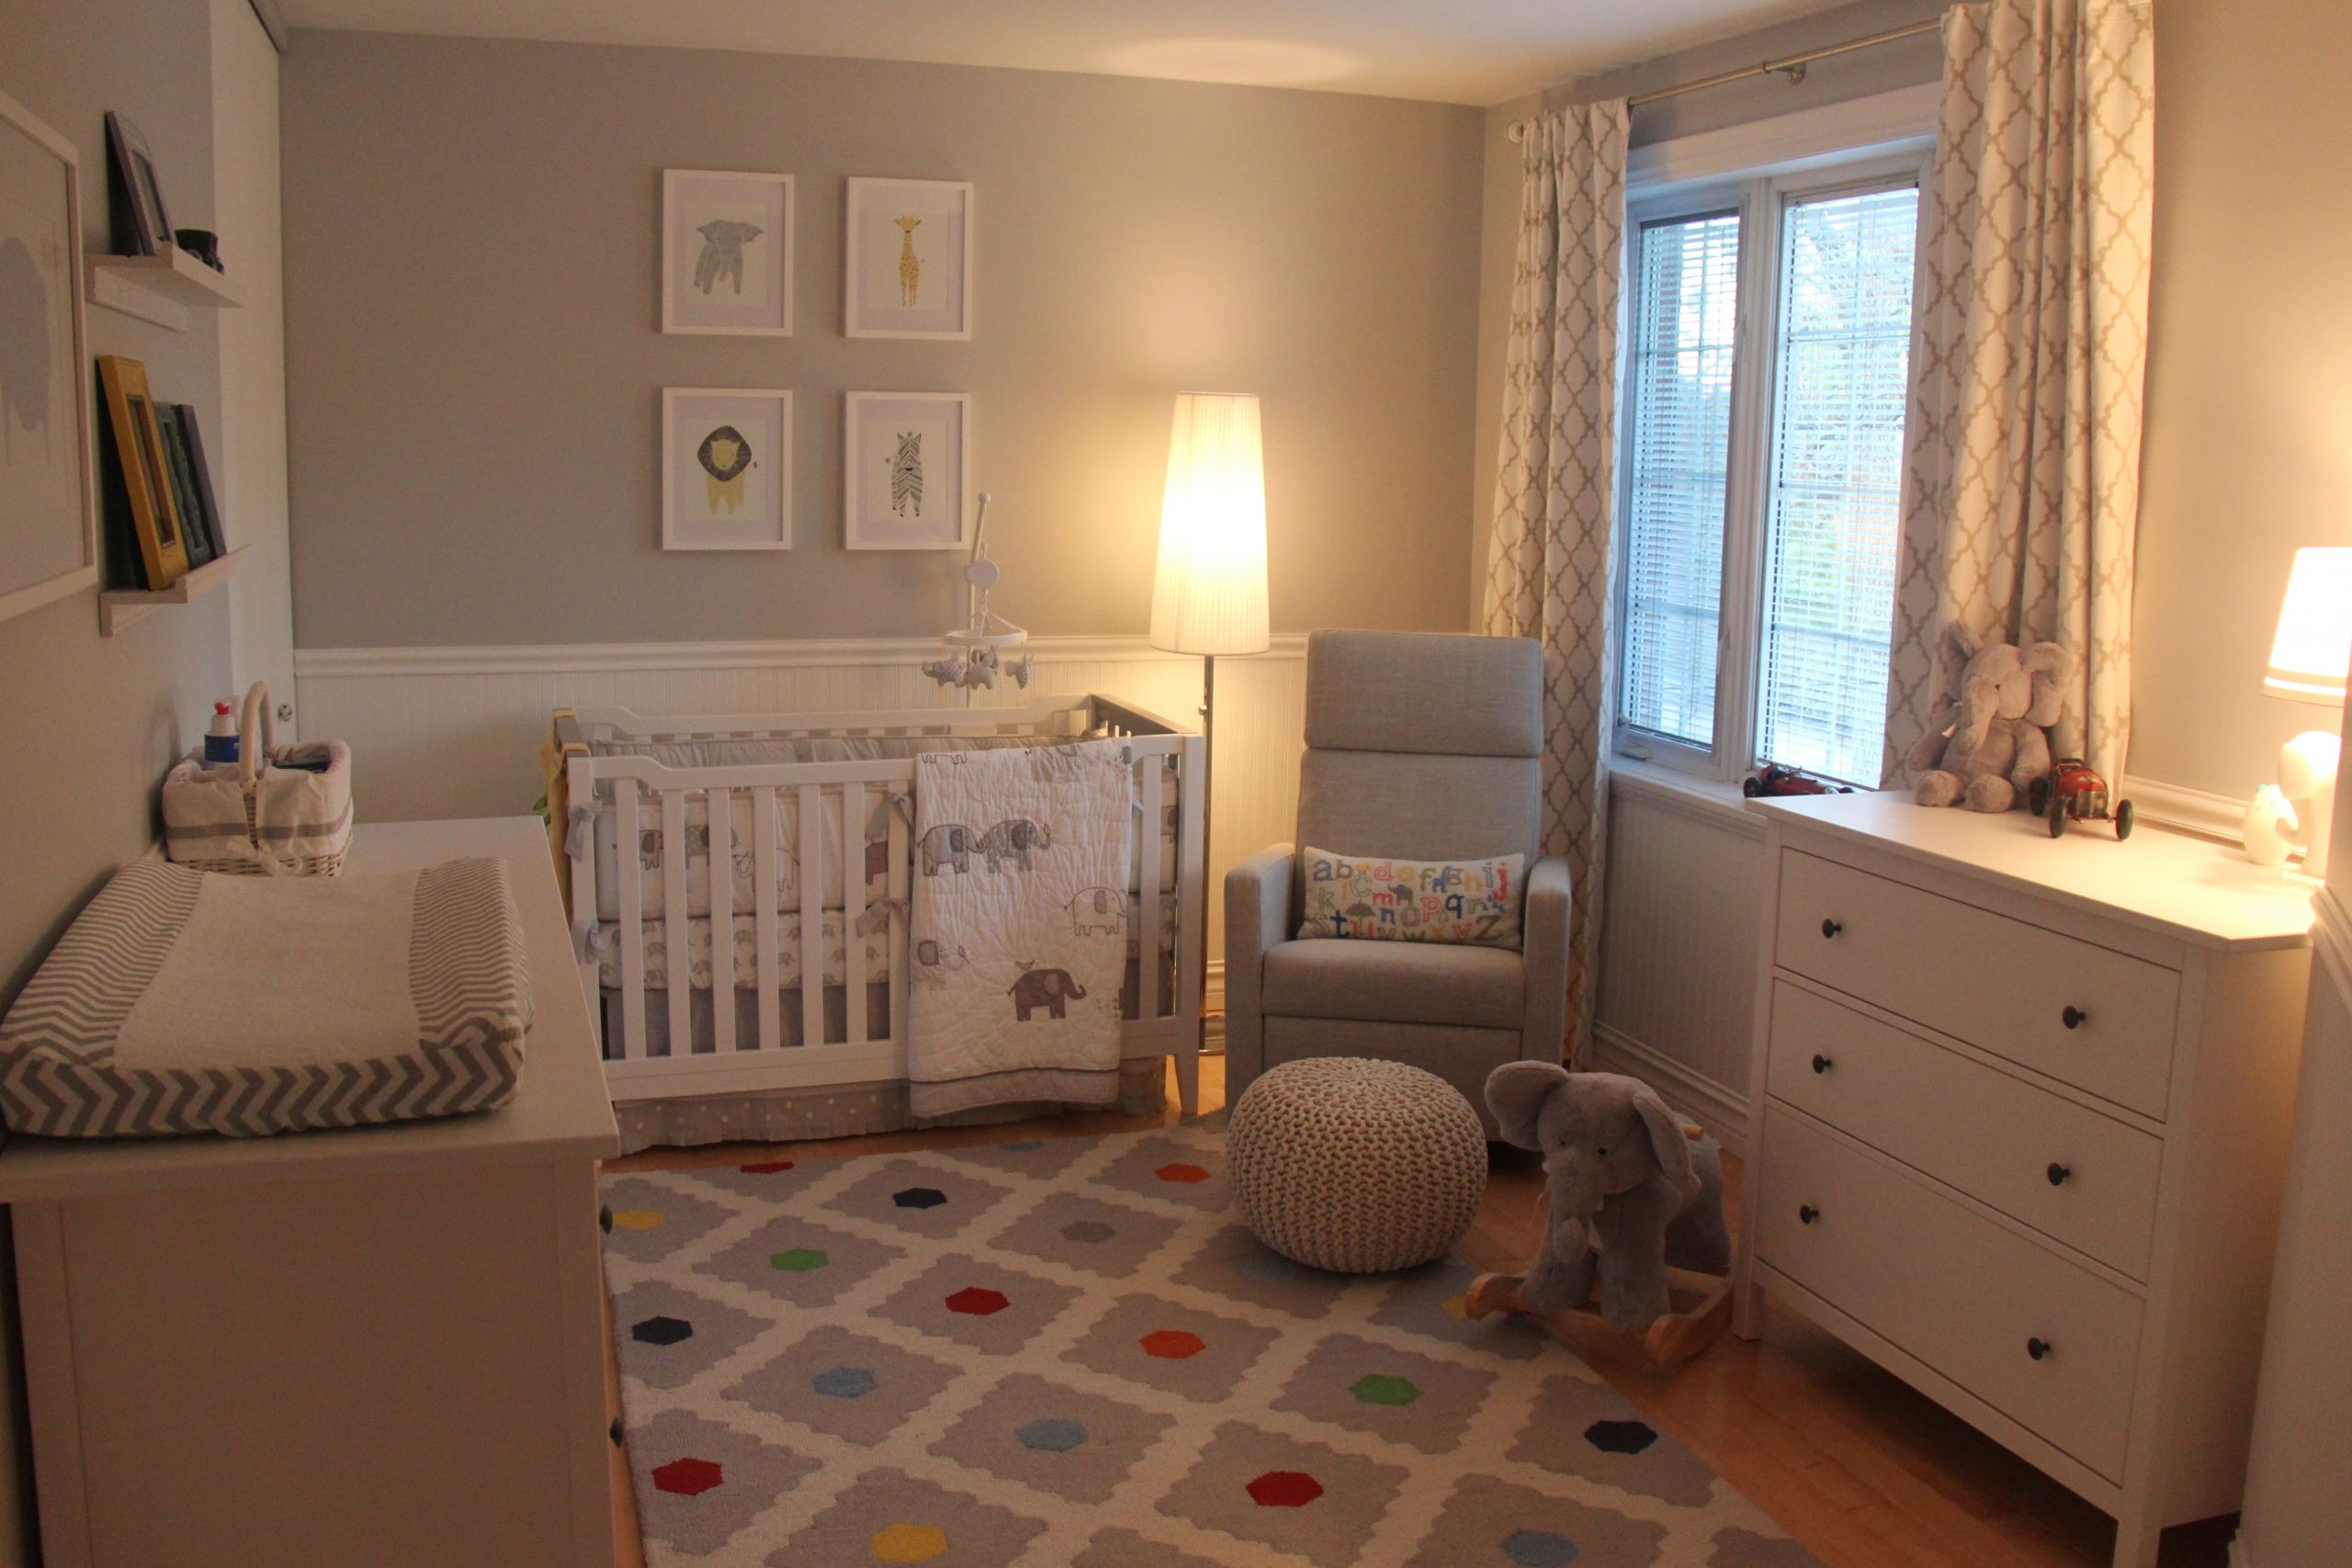 Baby Boy Rooms Decorating Ideas
 Our Little Baby Boy s Neutral Room Project Nursery